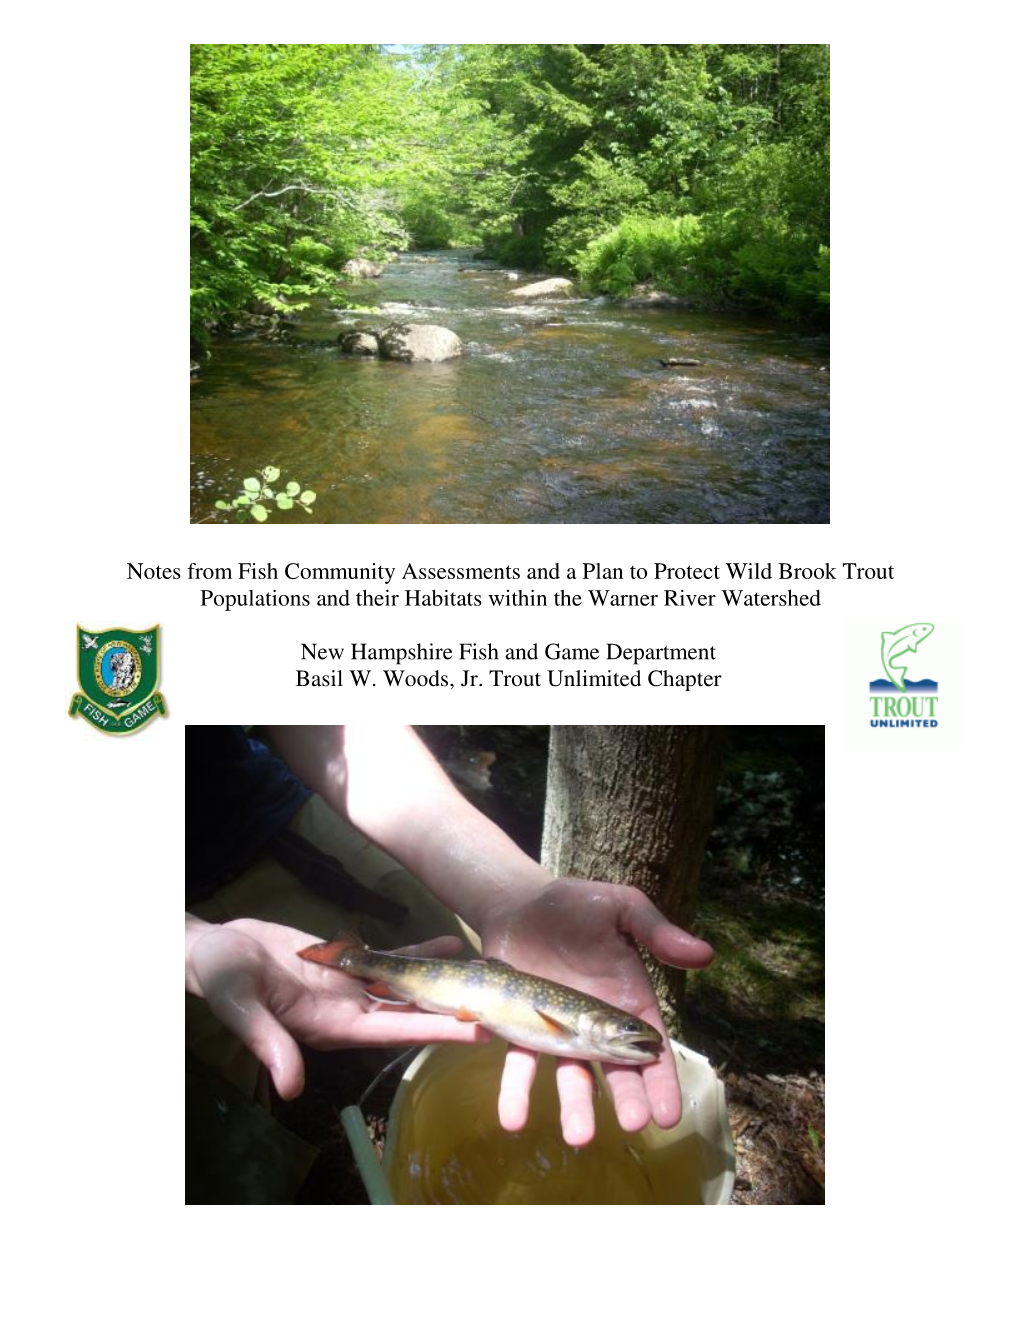 Notes from Fish Community Assessments and a Plan to Protect Wild Brook Trout Populations and Their Habitats Within the Warner River Watershed